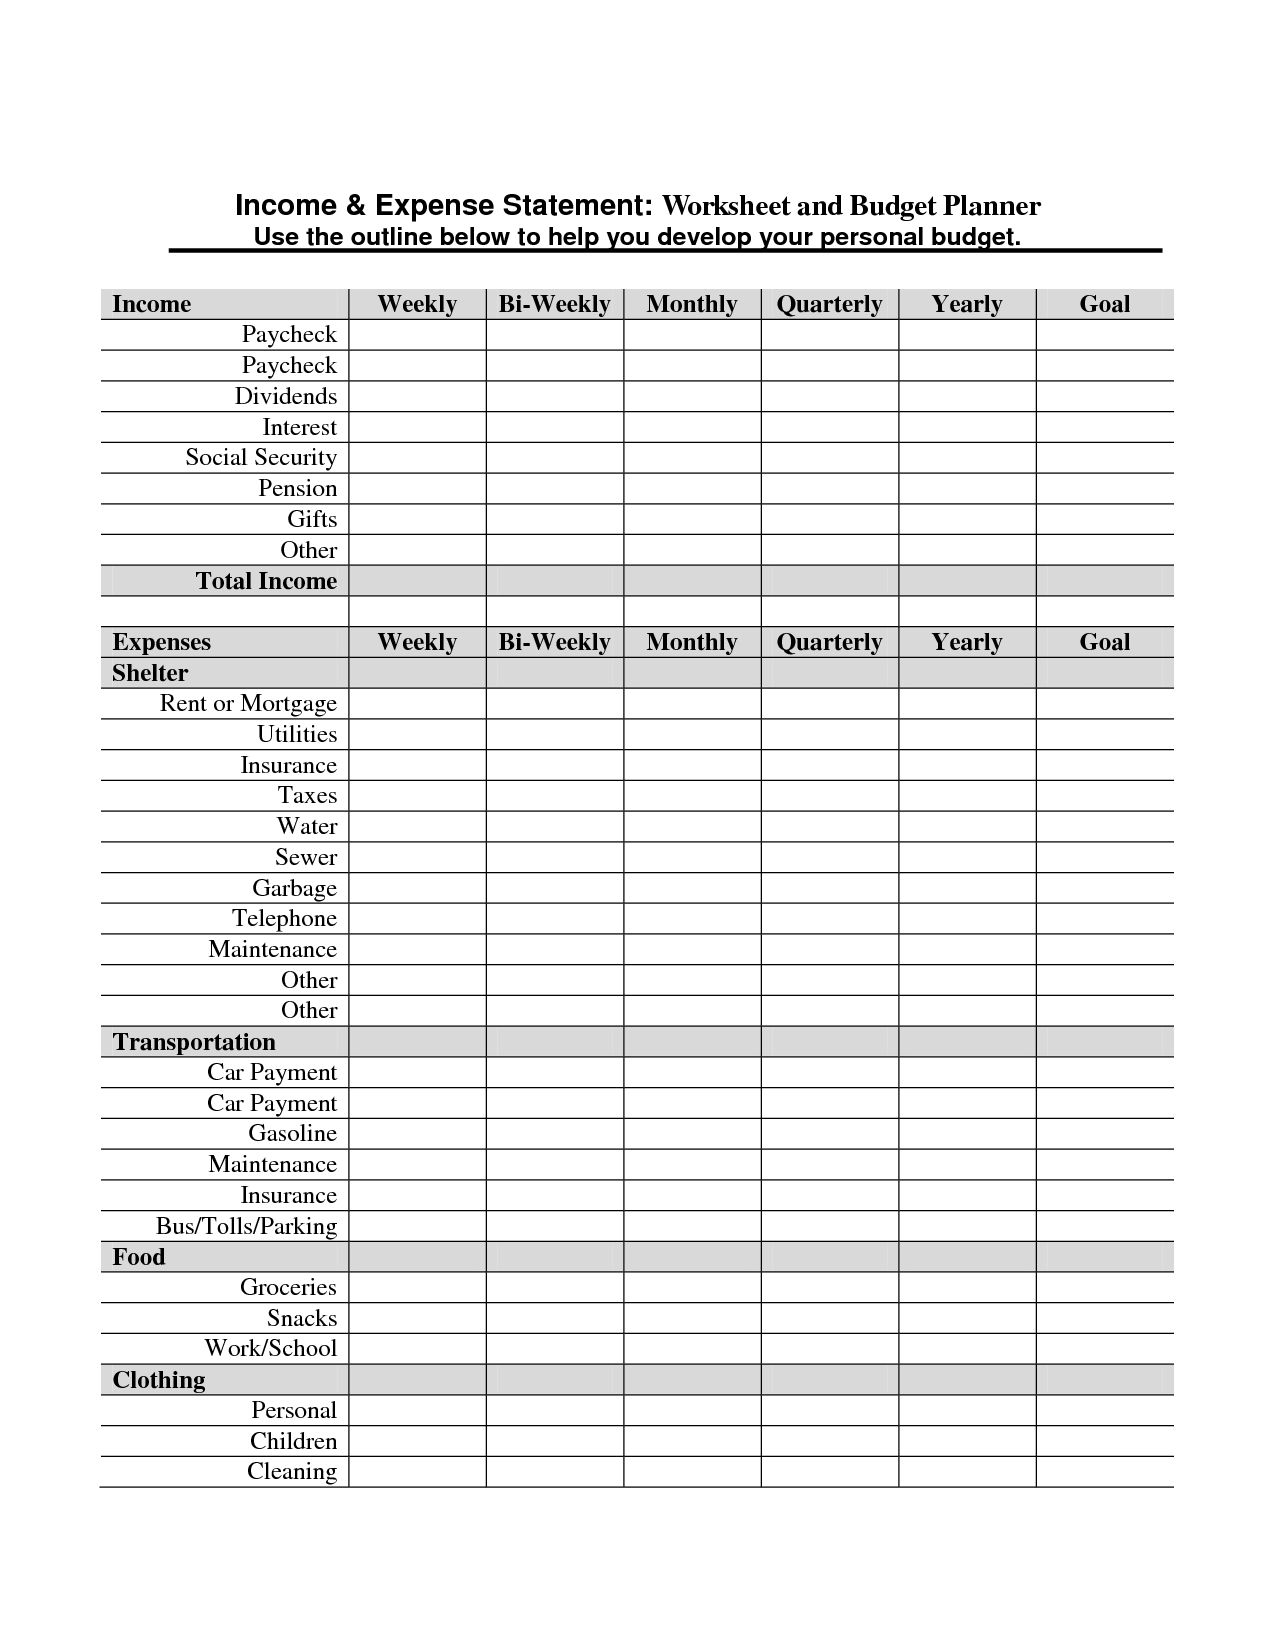 12-best-images-of-income-expense-monthly-budget-worksheet-income-and